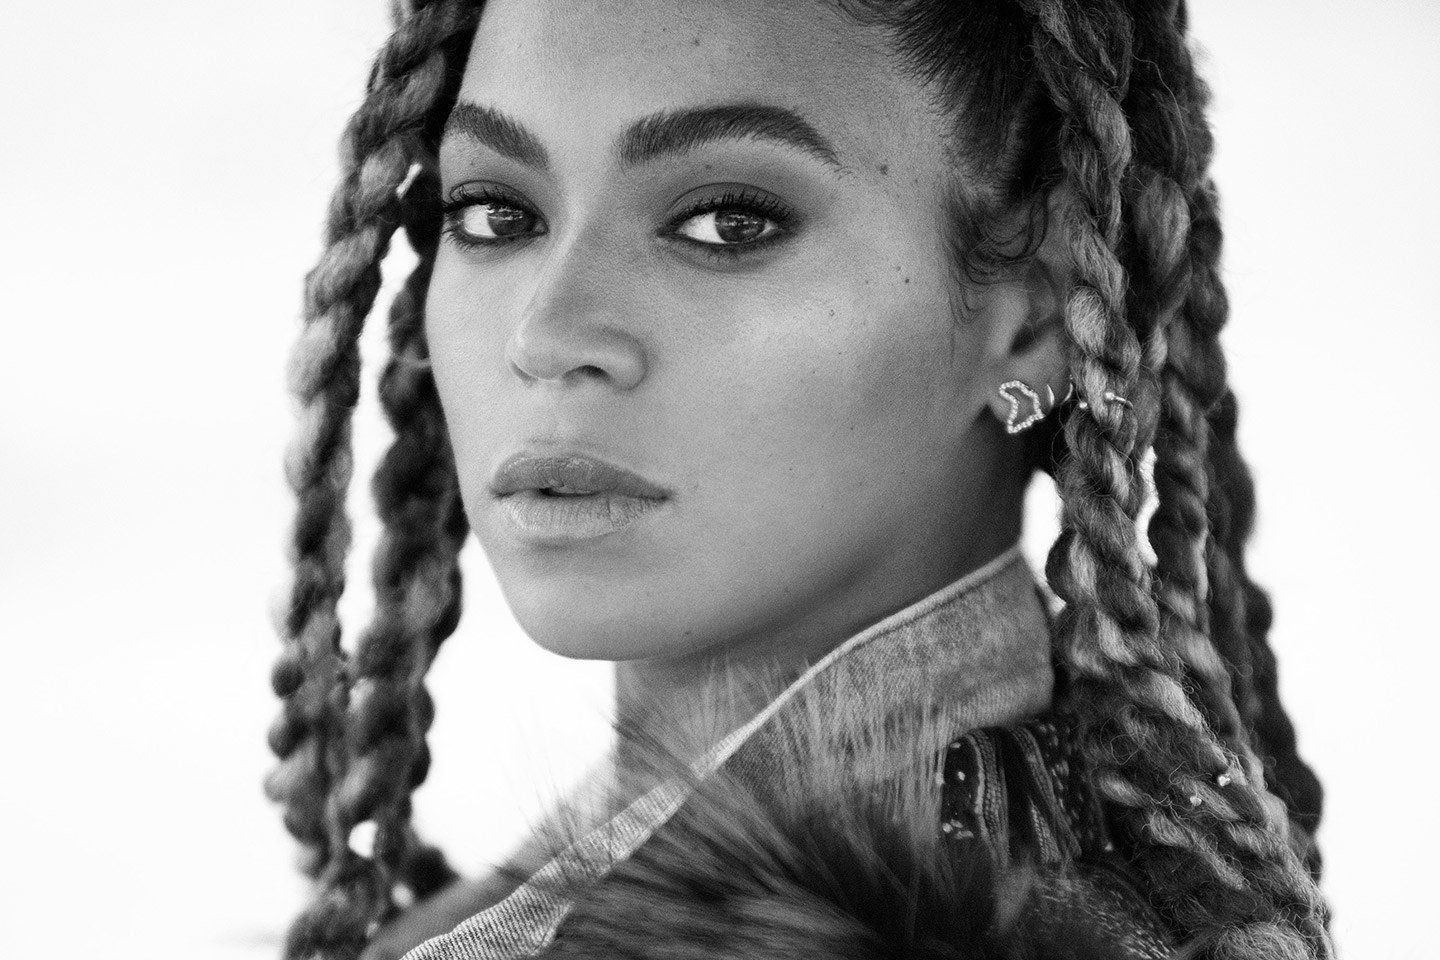 Beyonce reigns supreme as she is named the Highest Paid Woman in music 2017